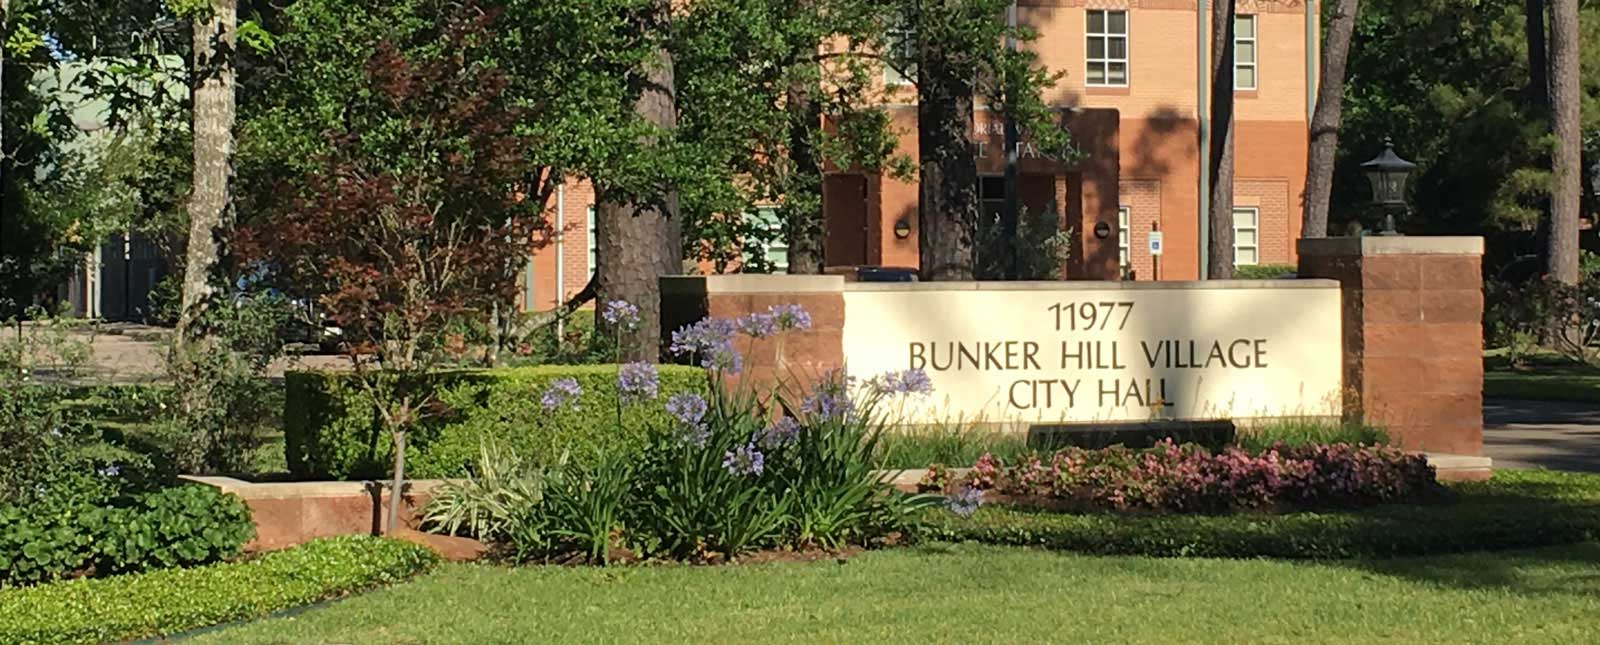 City of Bunker Hill Village City Hall sign